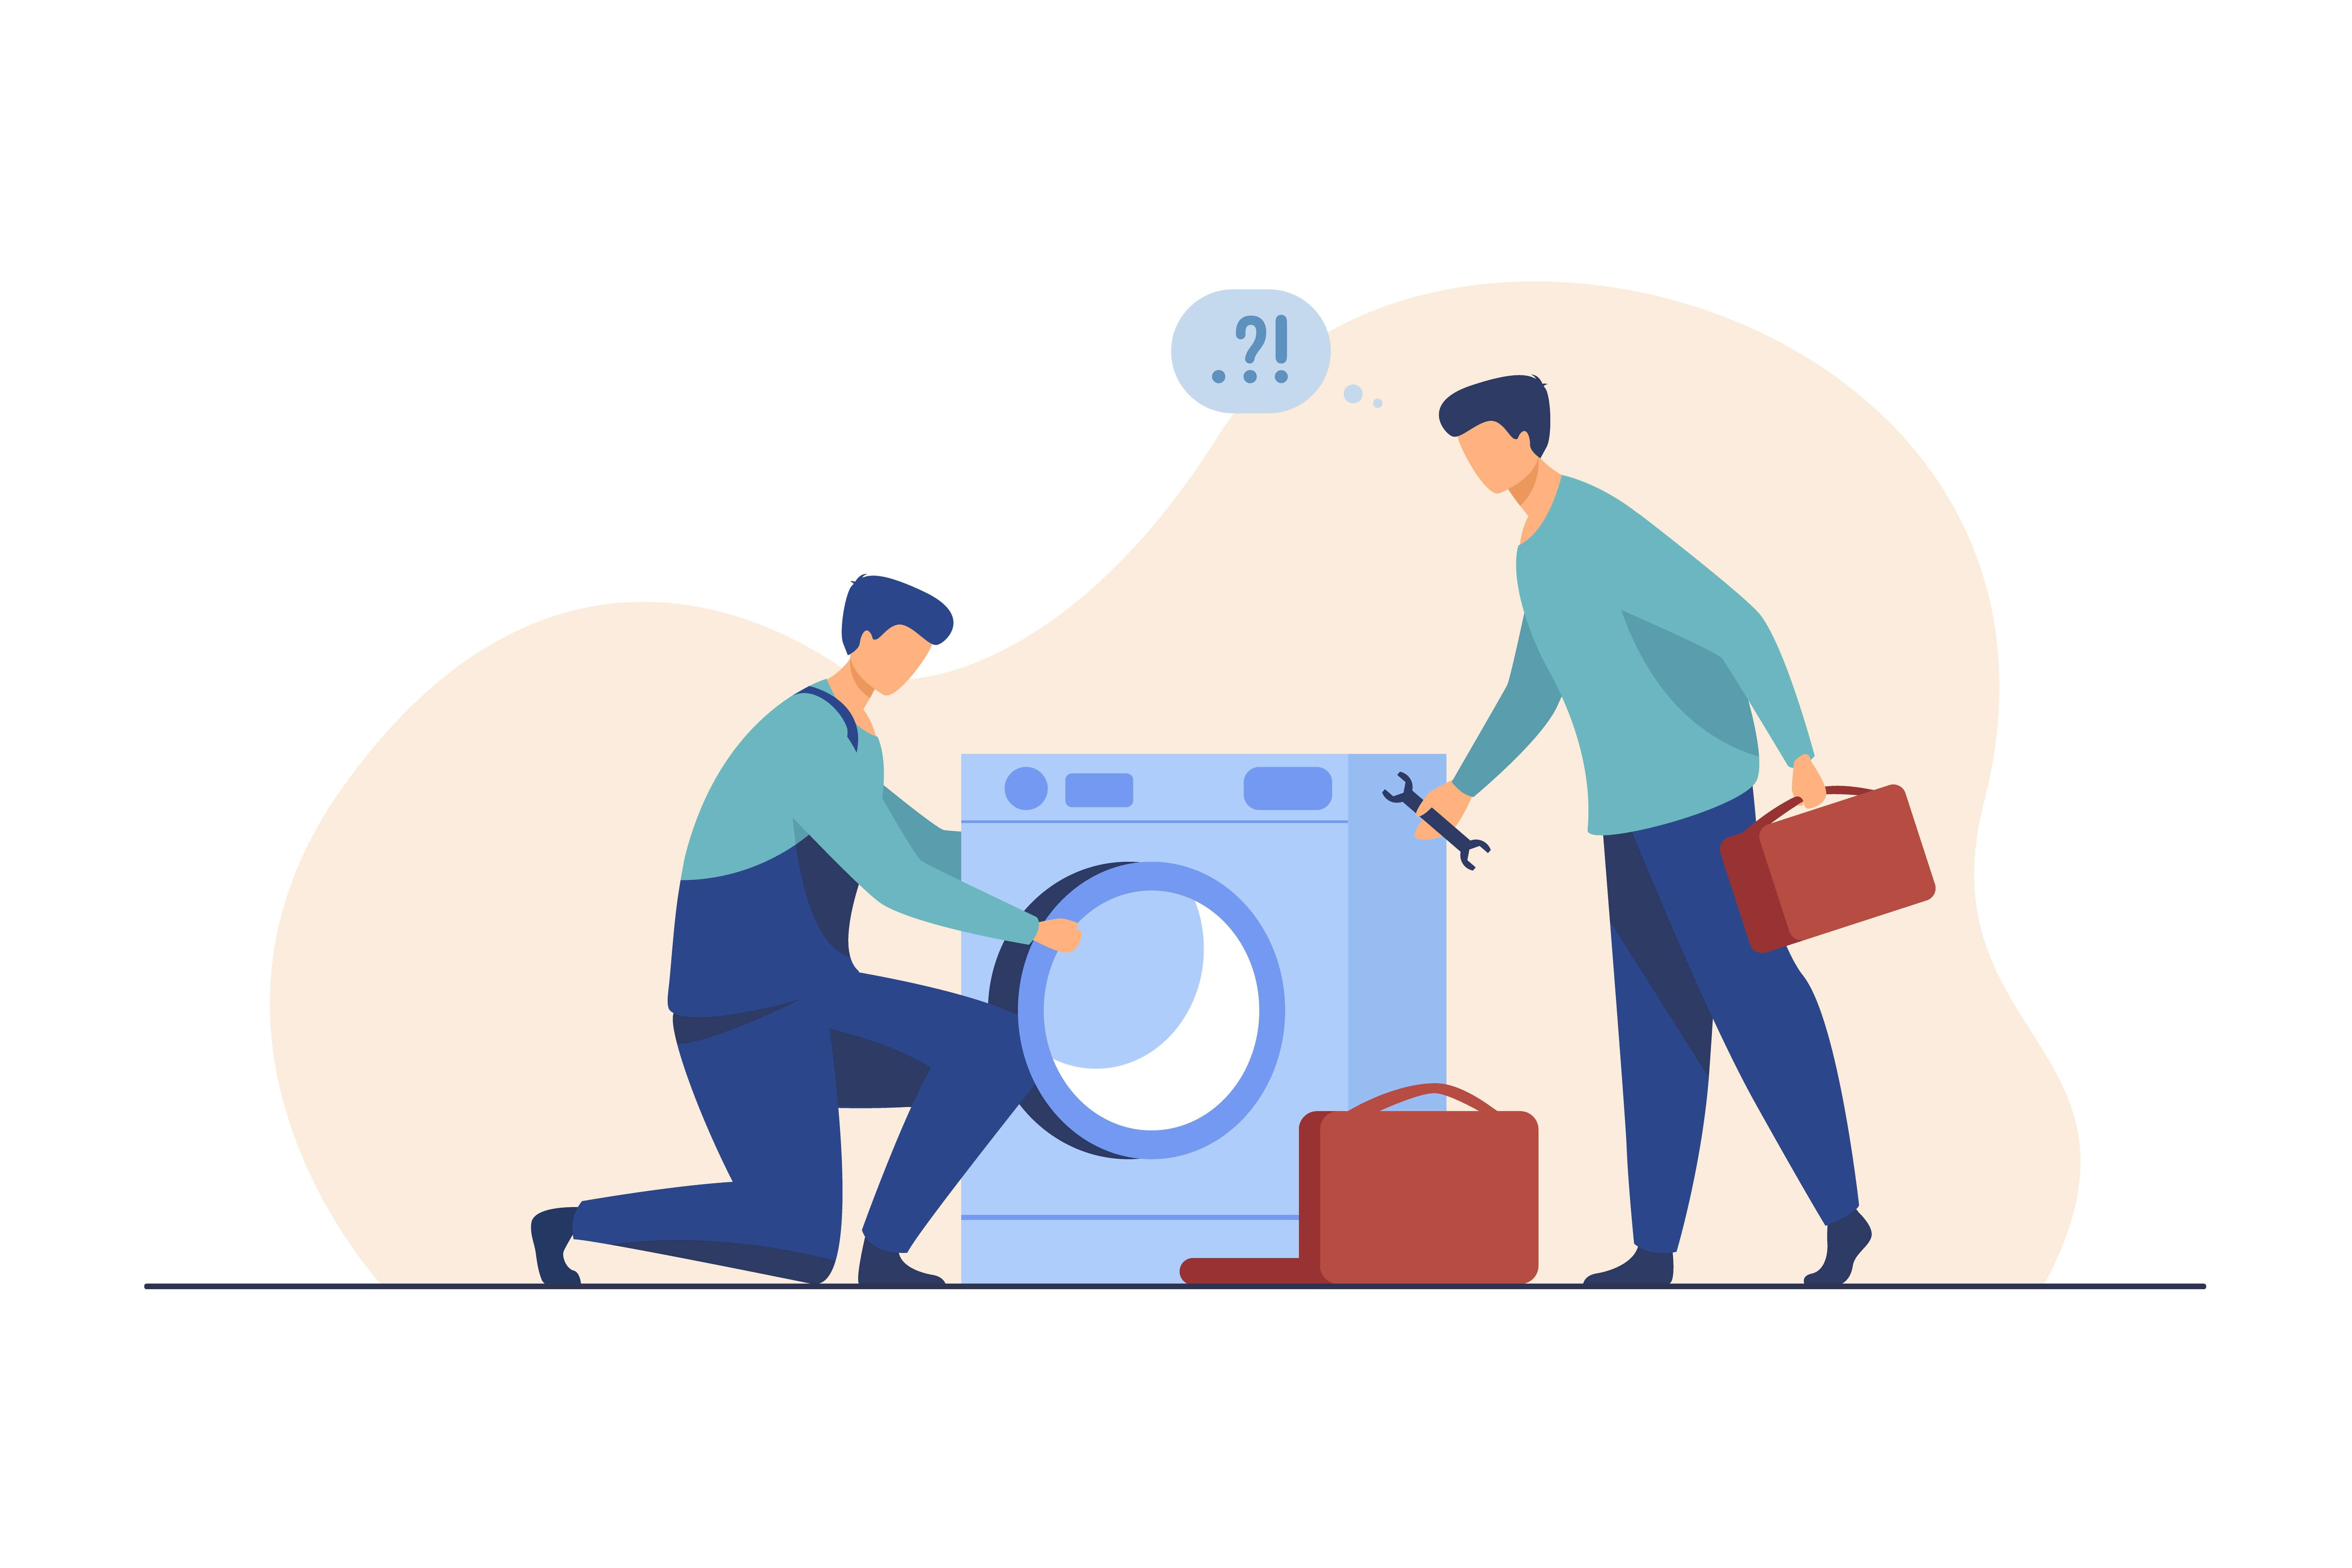 Should we repair or replace a washing machine if it is causing a lot of problems?